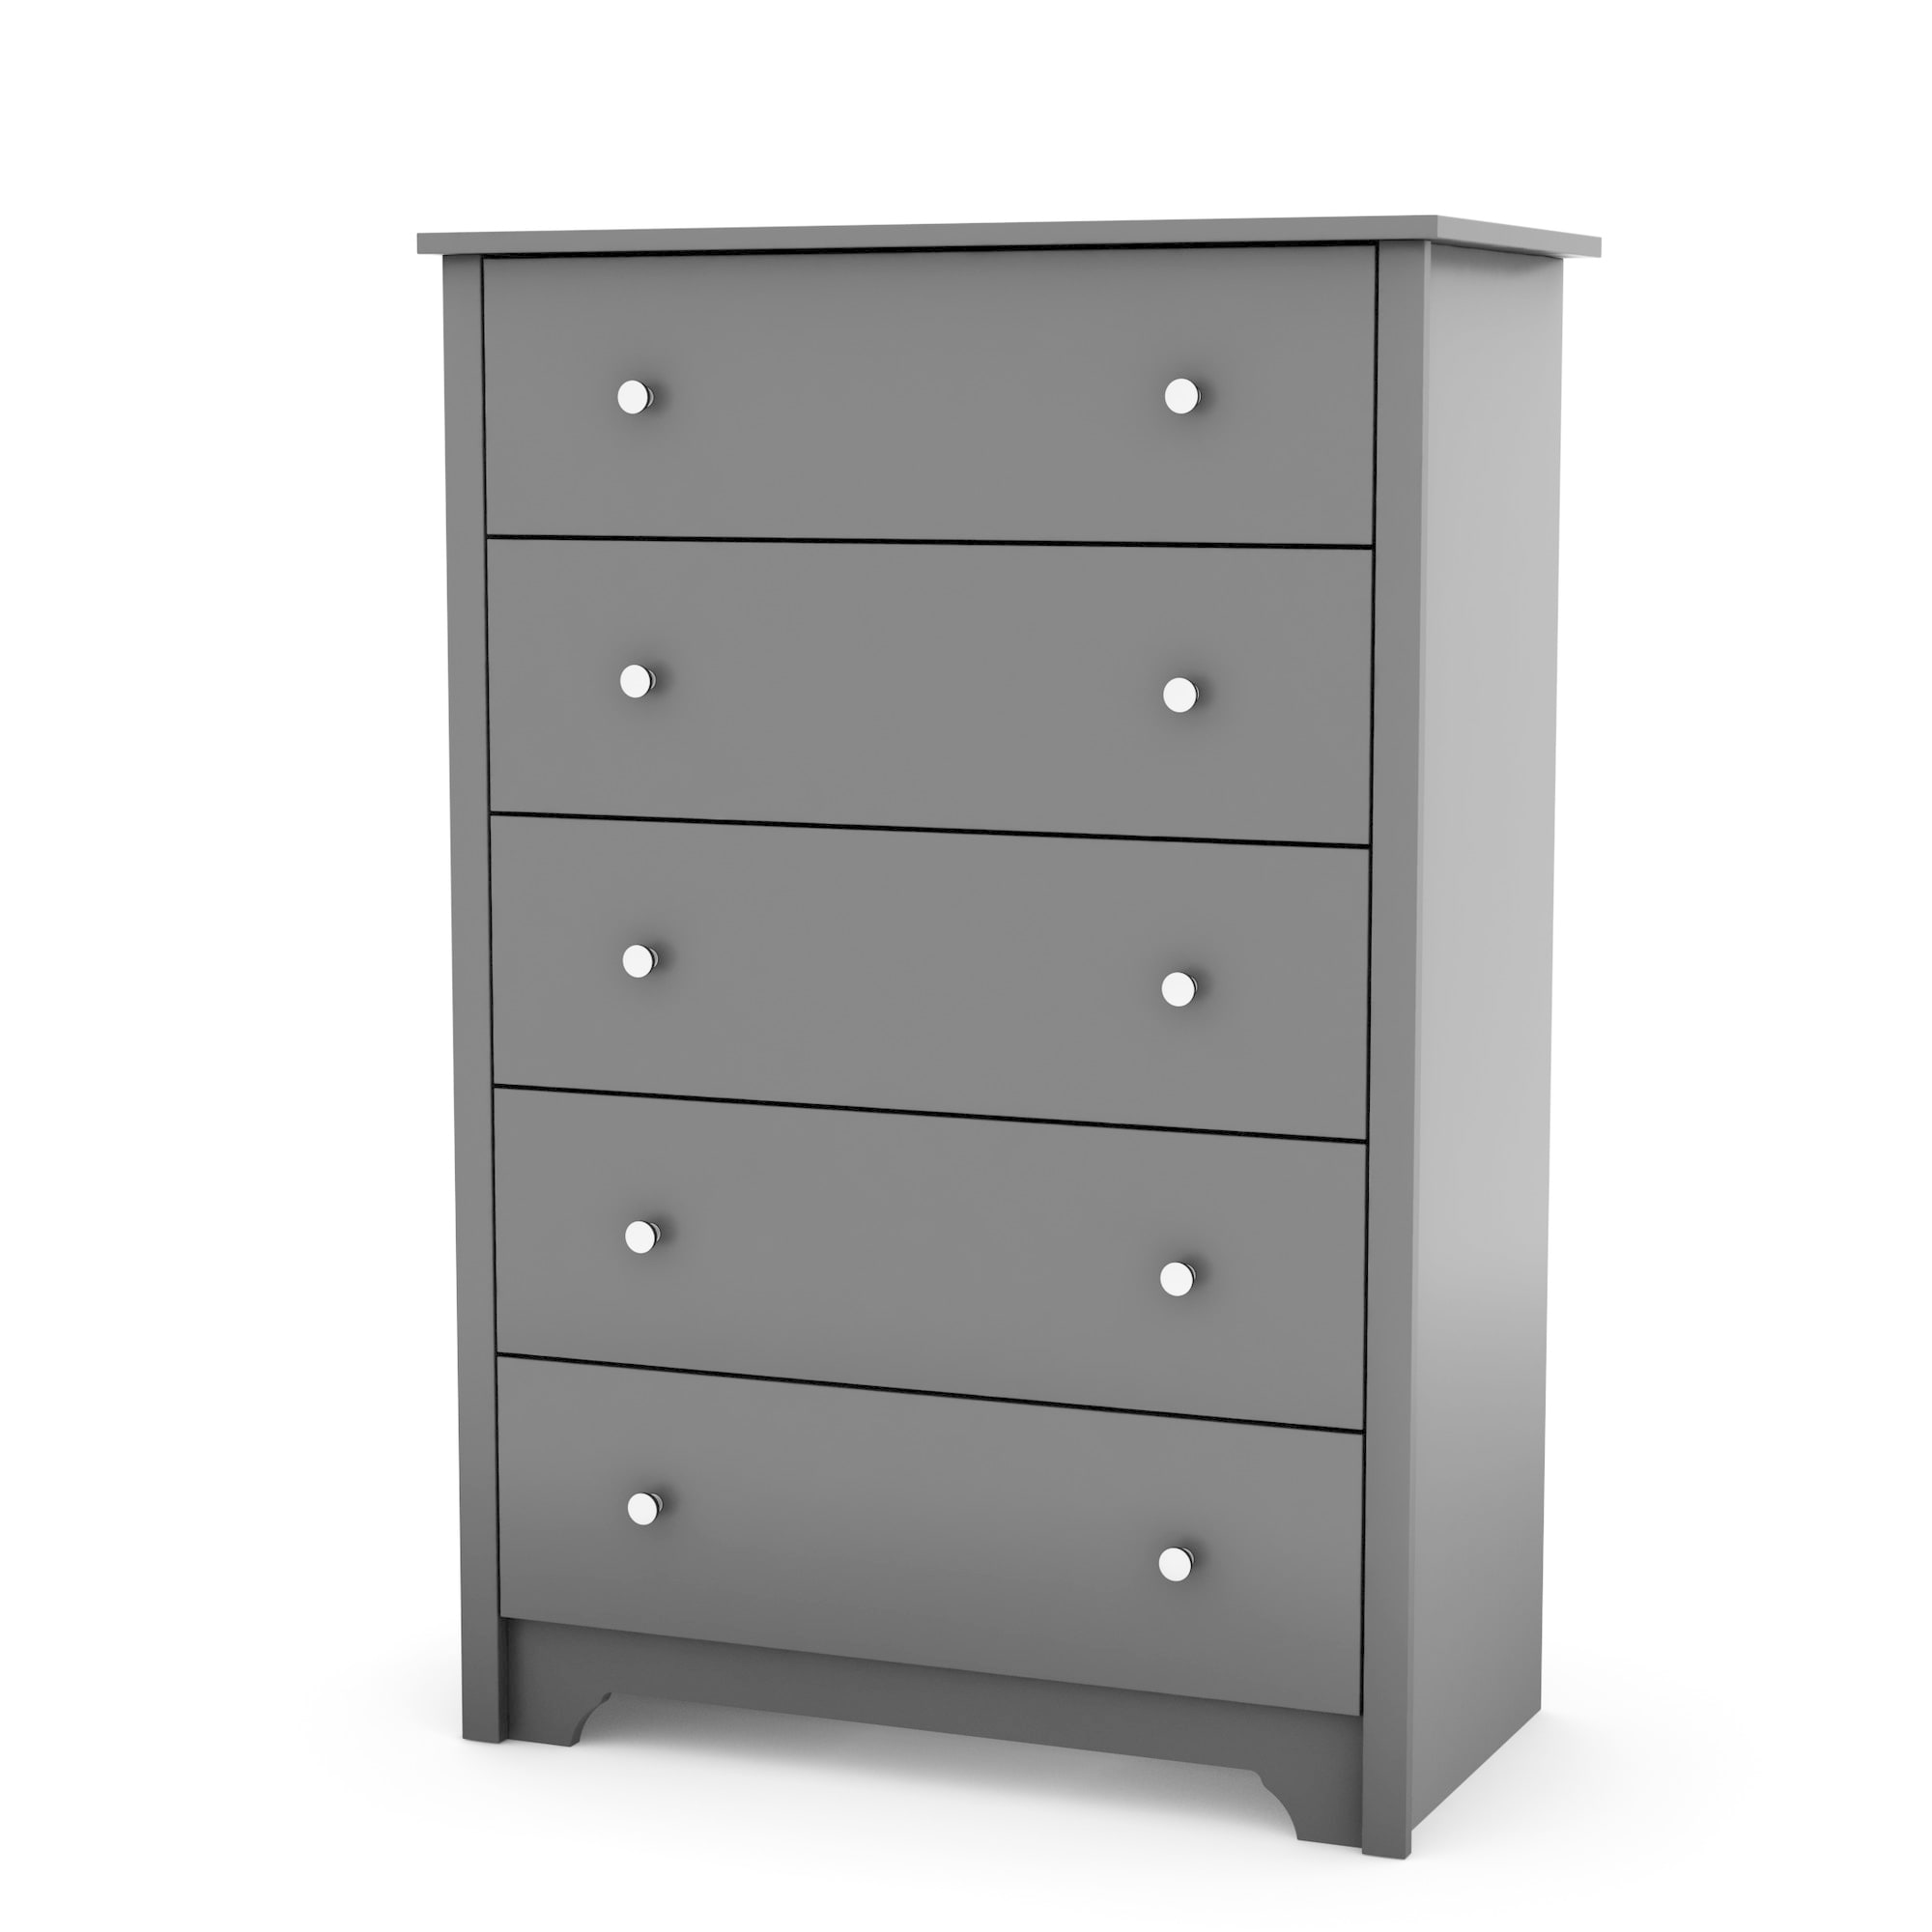 Shop South Shore Vito 5 Drawer Chest Overstock 10292187